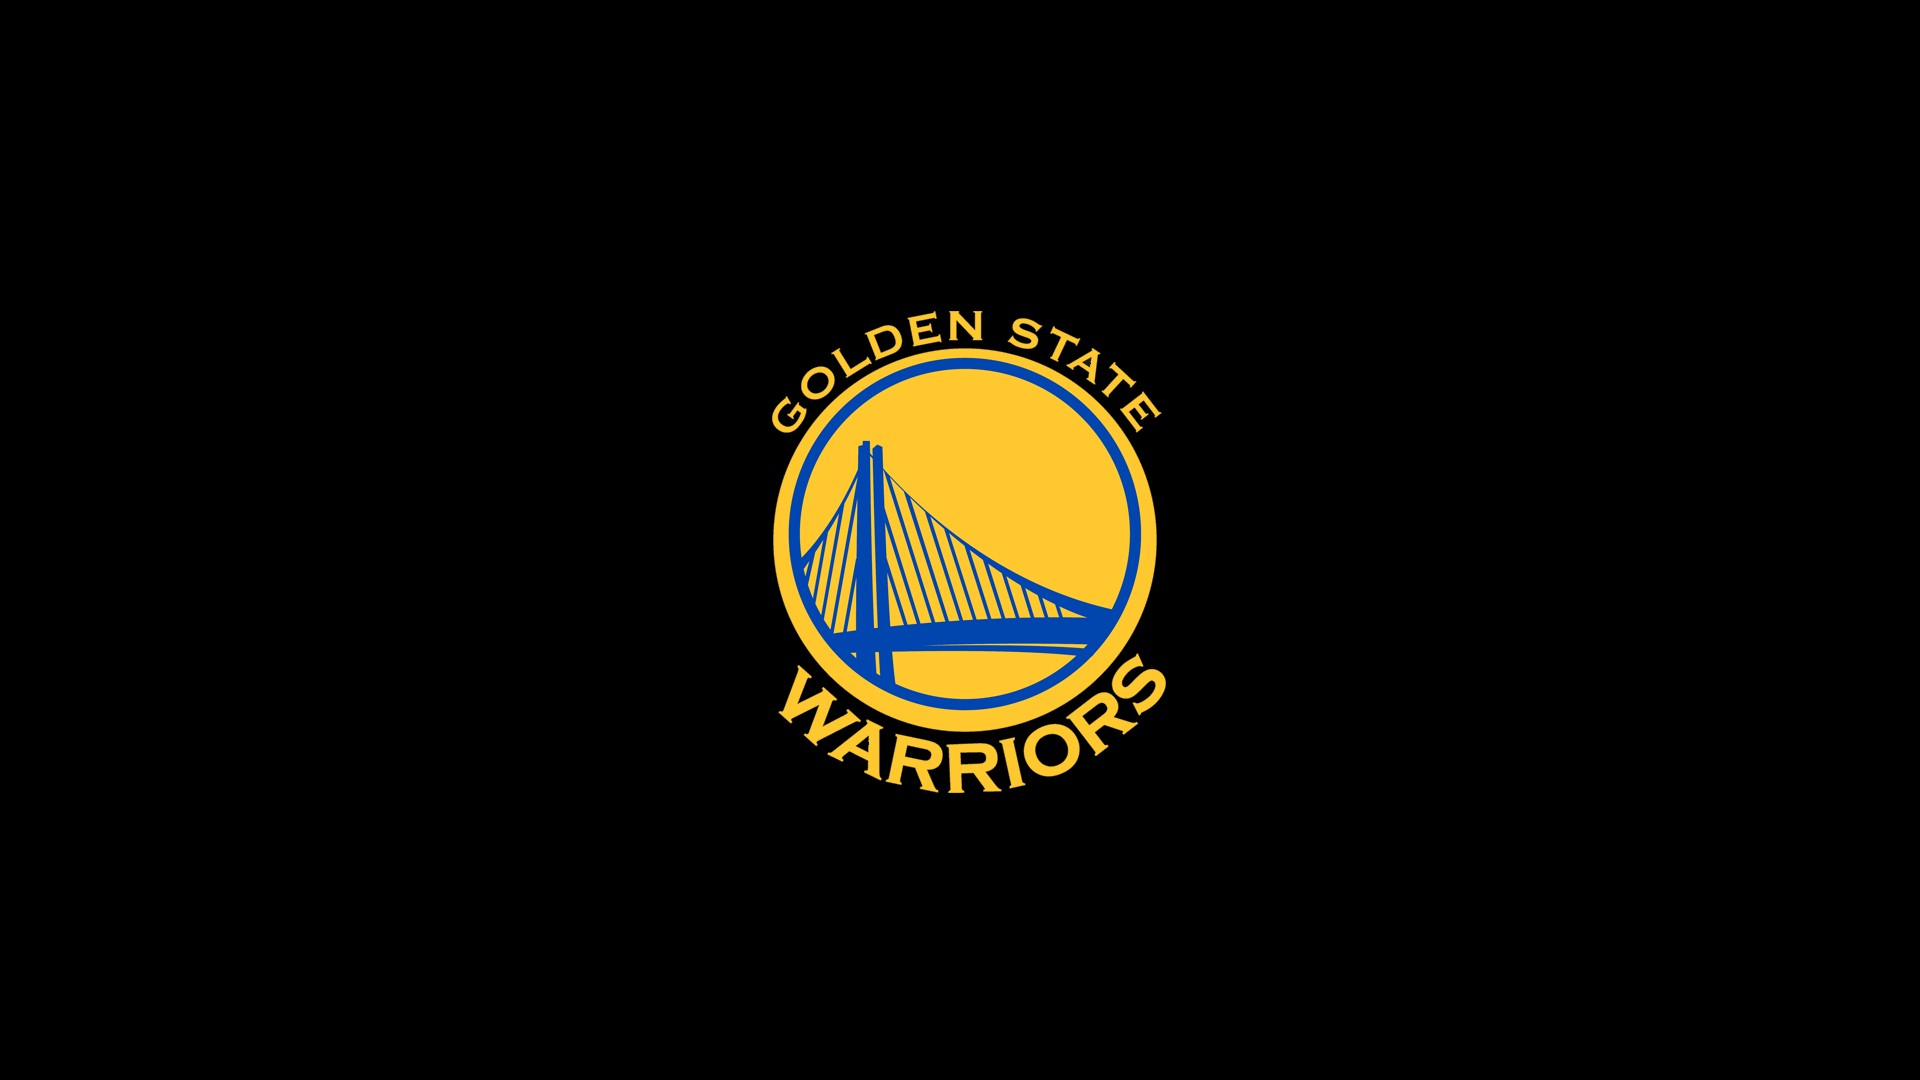 Golden State Warriors Logo Desktop Wallpapers with image dimensions 1920x1080 pixel. You can make this wallpaper for your Desktop Computer Backgrounds, Windows or Mac Screensavers, iPhone Lock screen, Tablet or Android and another Mobile Phone device